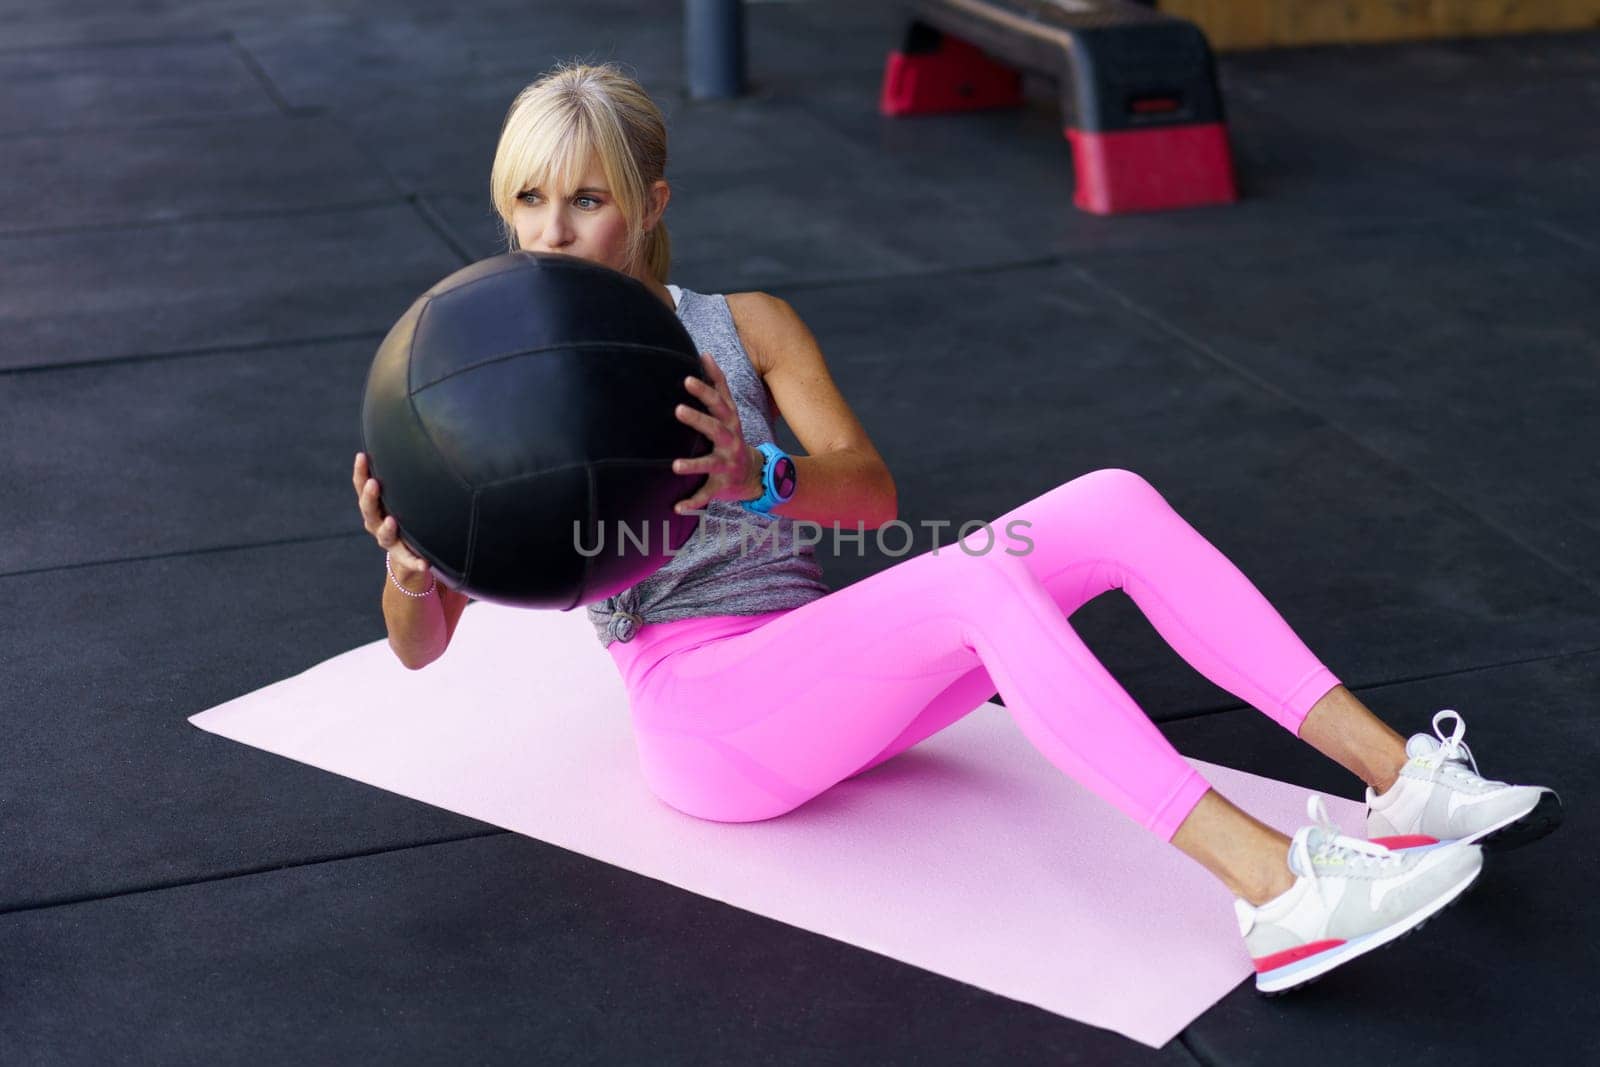 Sportswoman doing exercises with medicine ball on mat in gym by javiindy